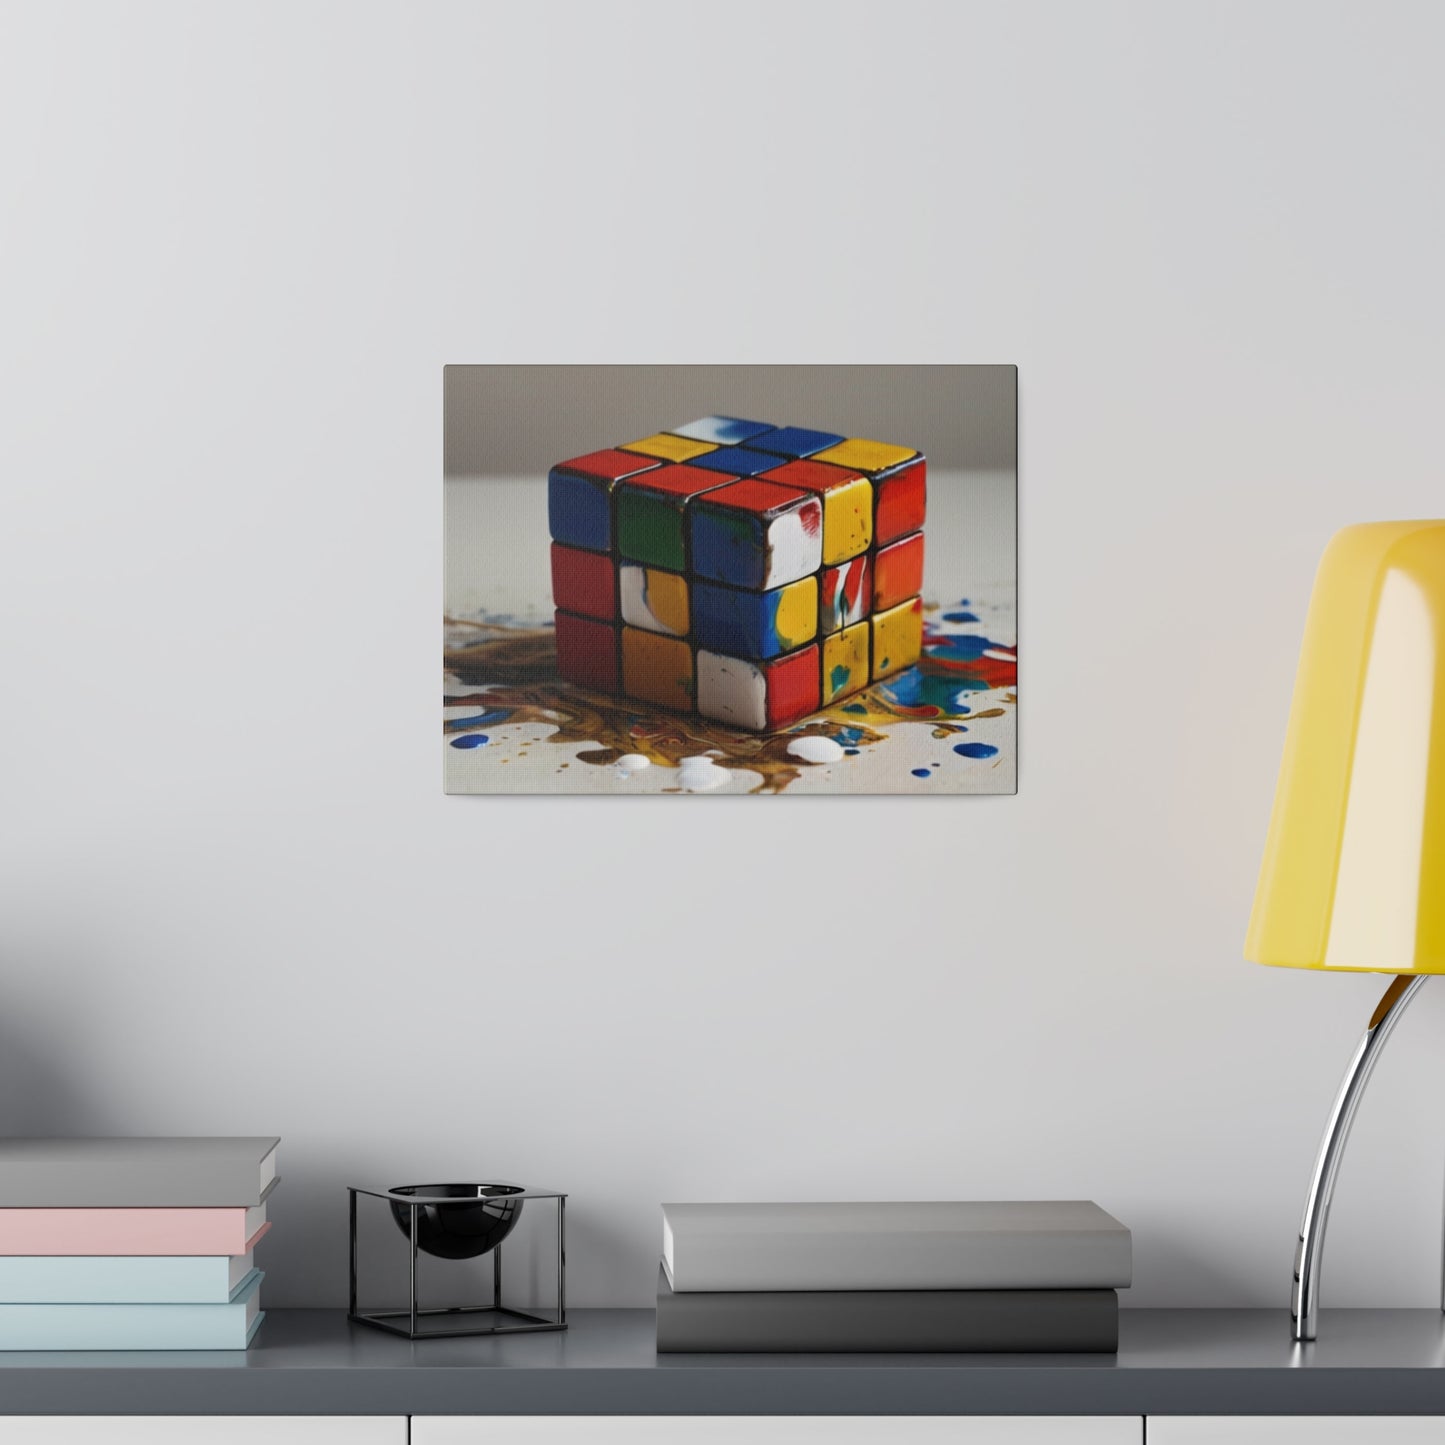 Messy Painted Rubik's Cube - Matte Canvas, Stretched, 0.75"